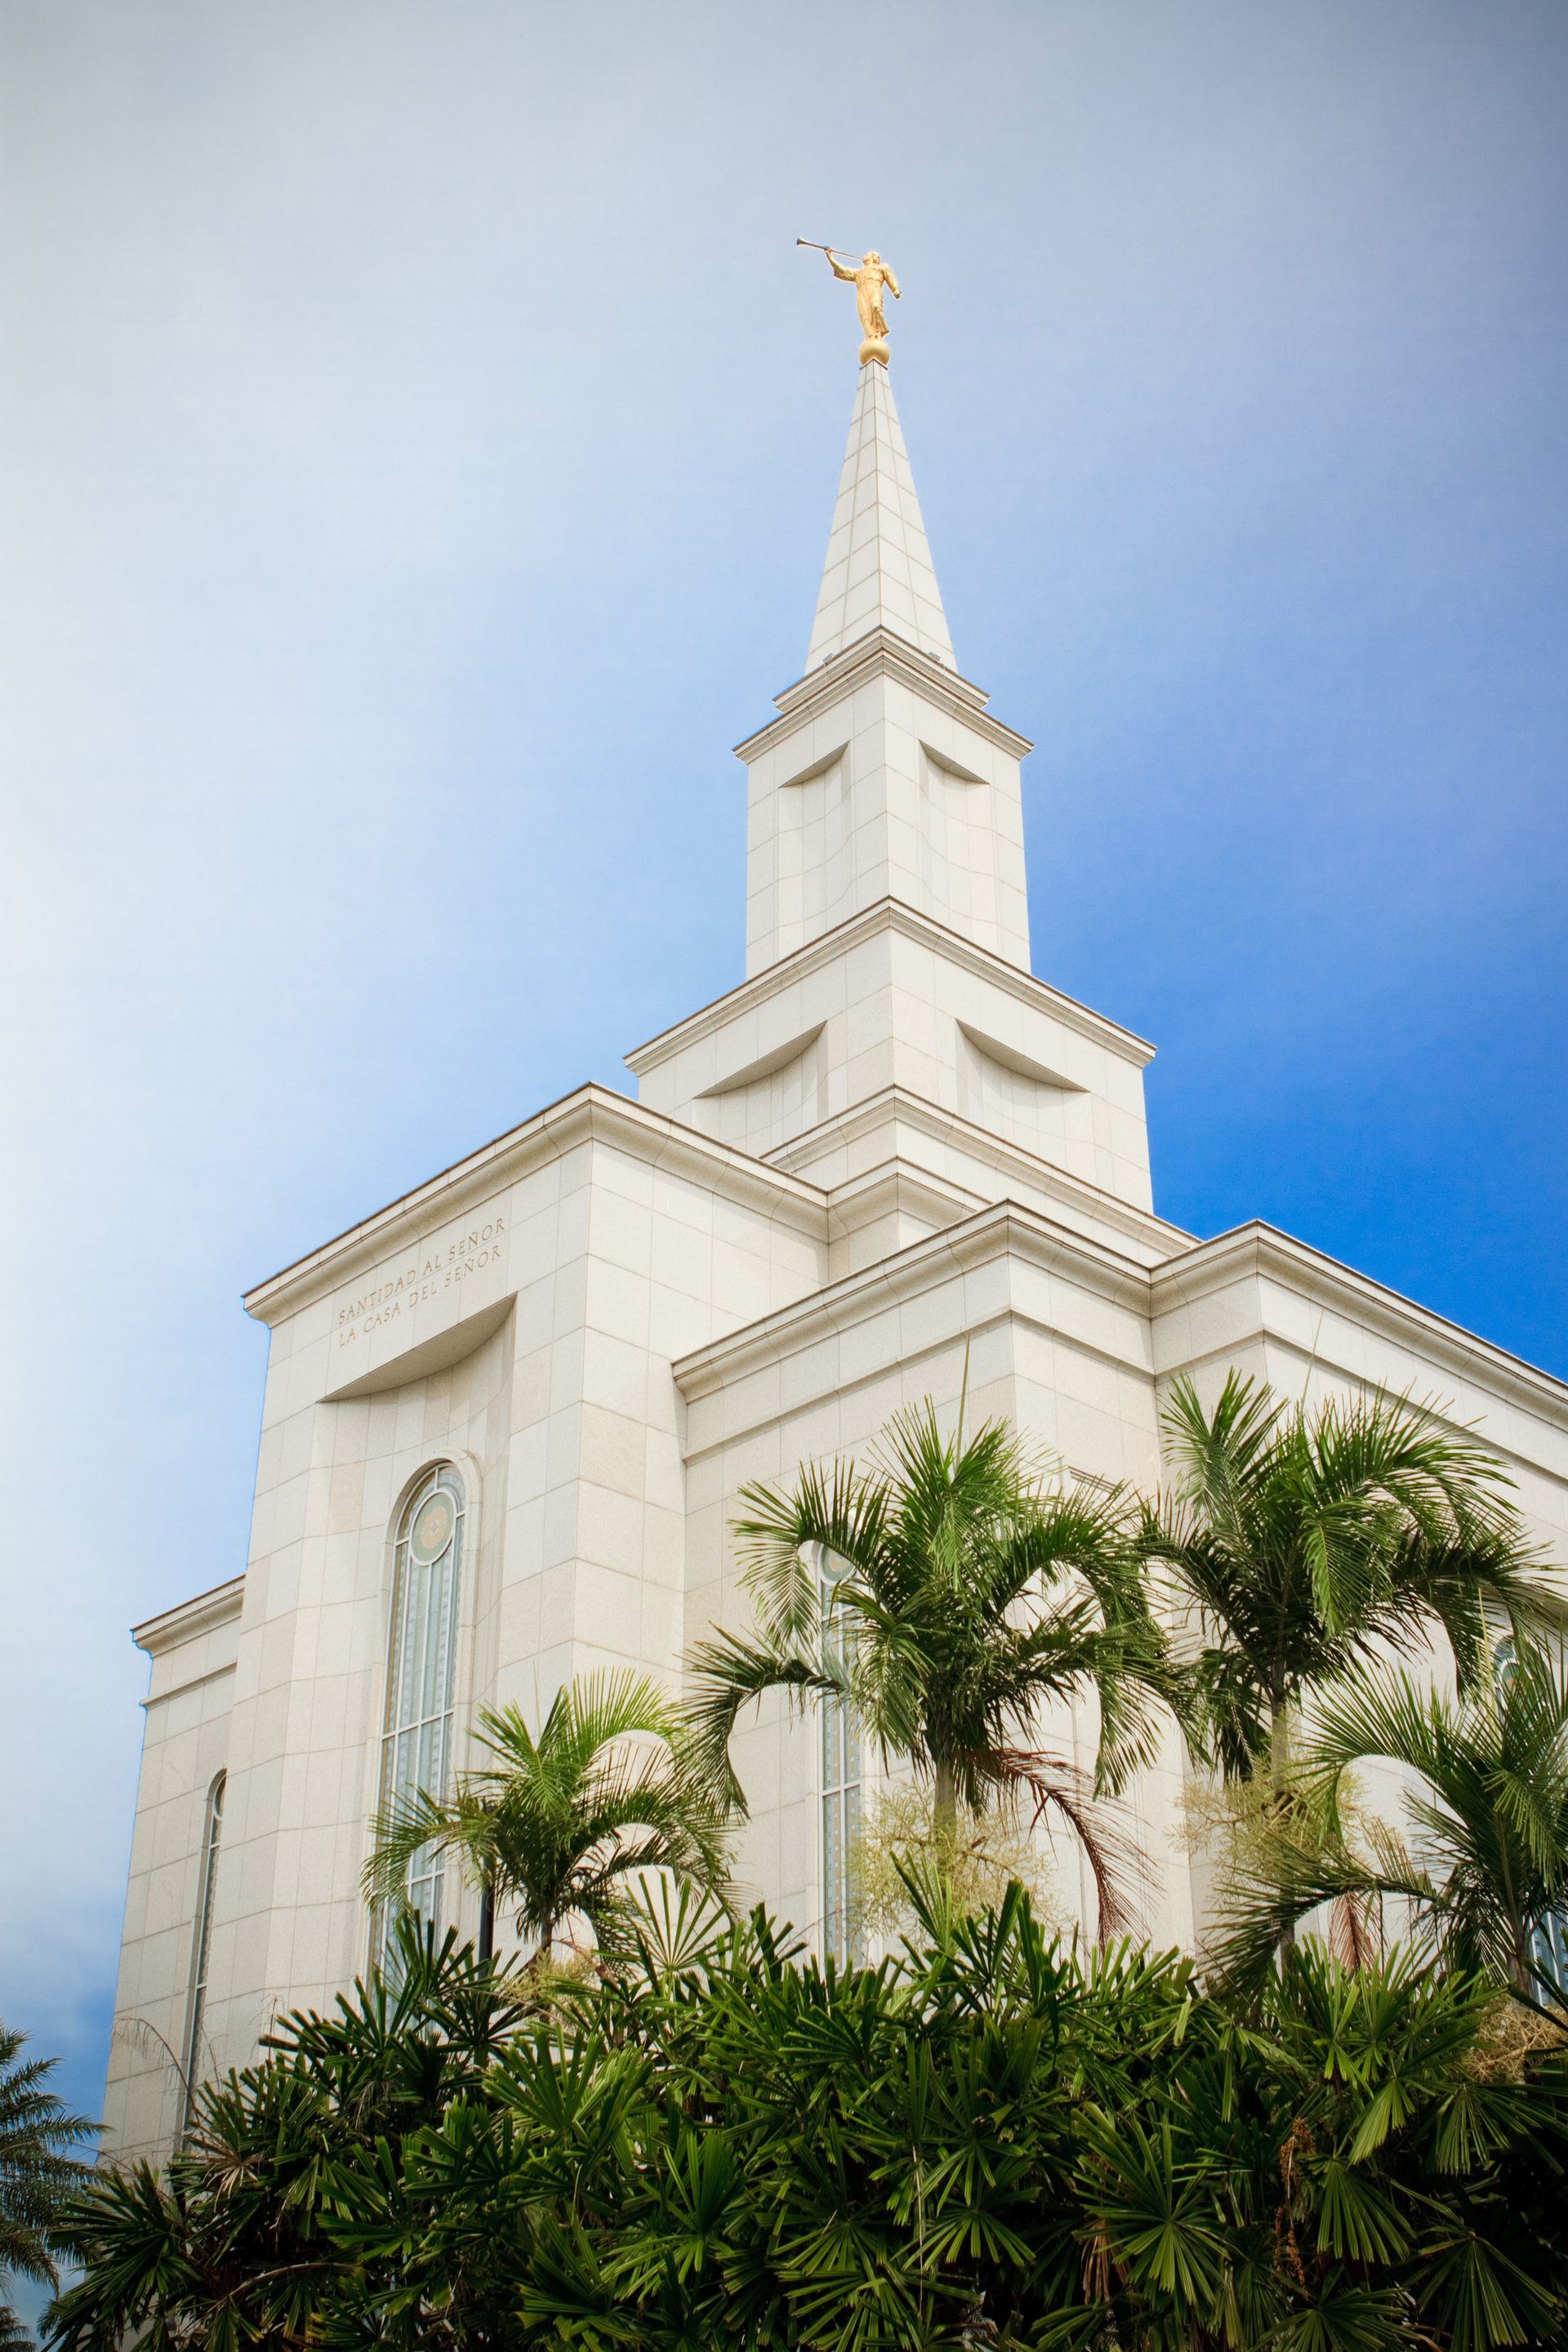 An upward view of the spire of the Guayaquil Ecuador Temple.